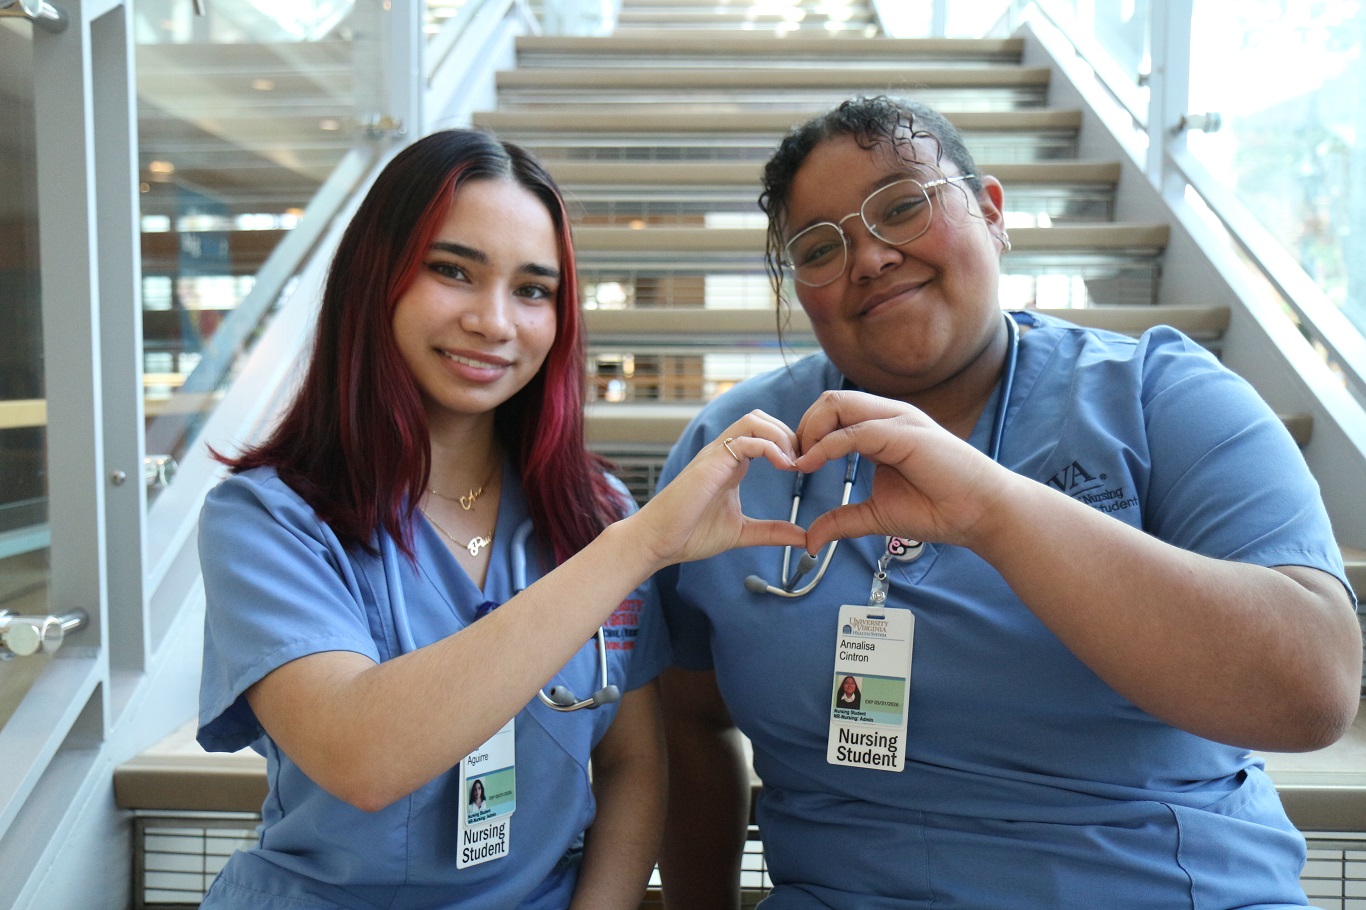 Two nursing students sitting on the steps, forming a heart shape with their hands.